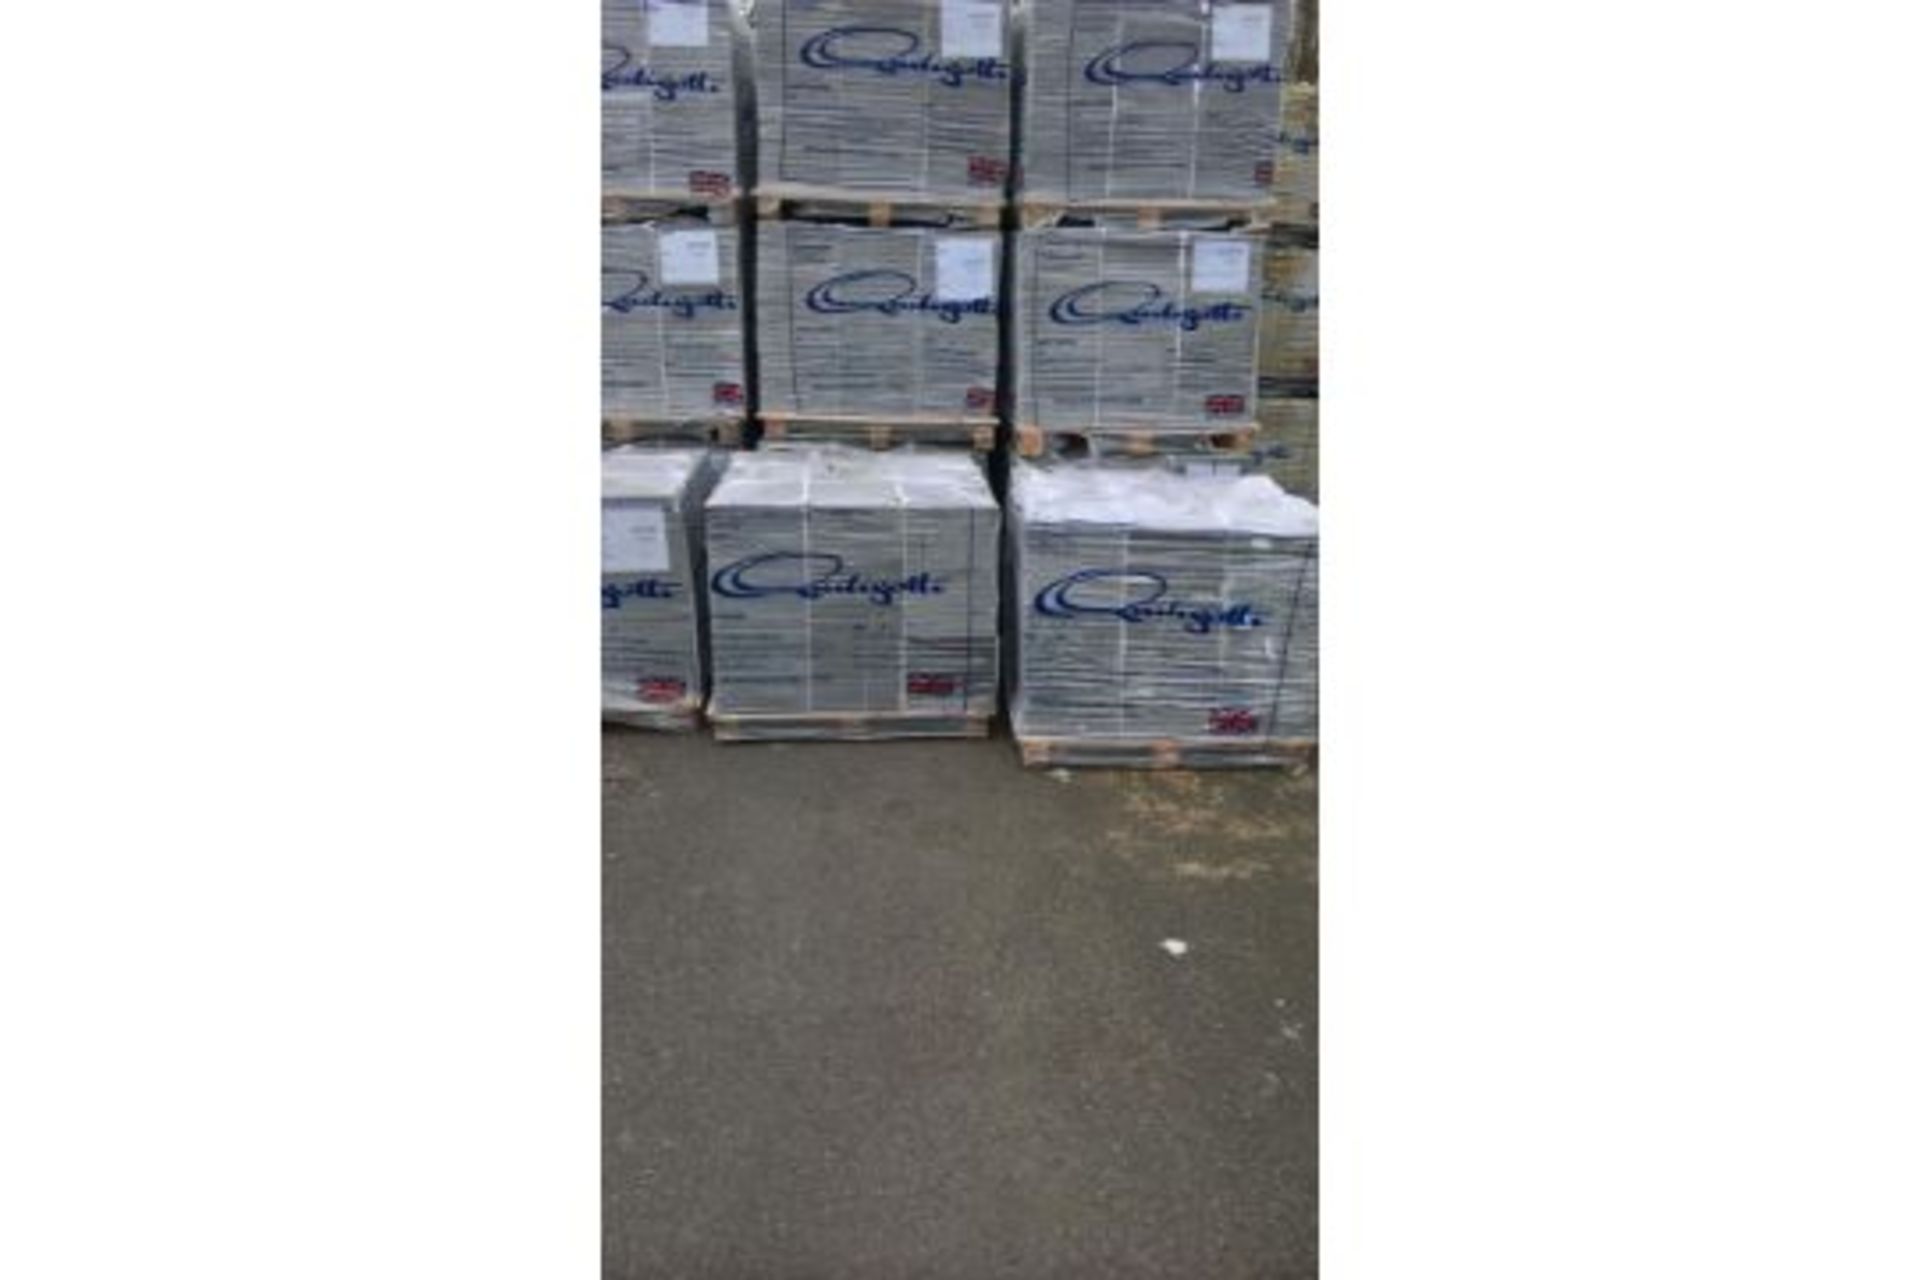 1 PALLET OF BRAND NEW GREY TERRAZZO COMMERCIAL FLOOR TILES Z30099, COVERS 24 SQUARE YARDS *PLUS VAT* - Image 2 of 3